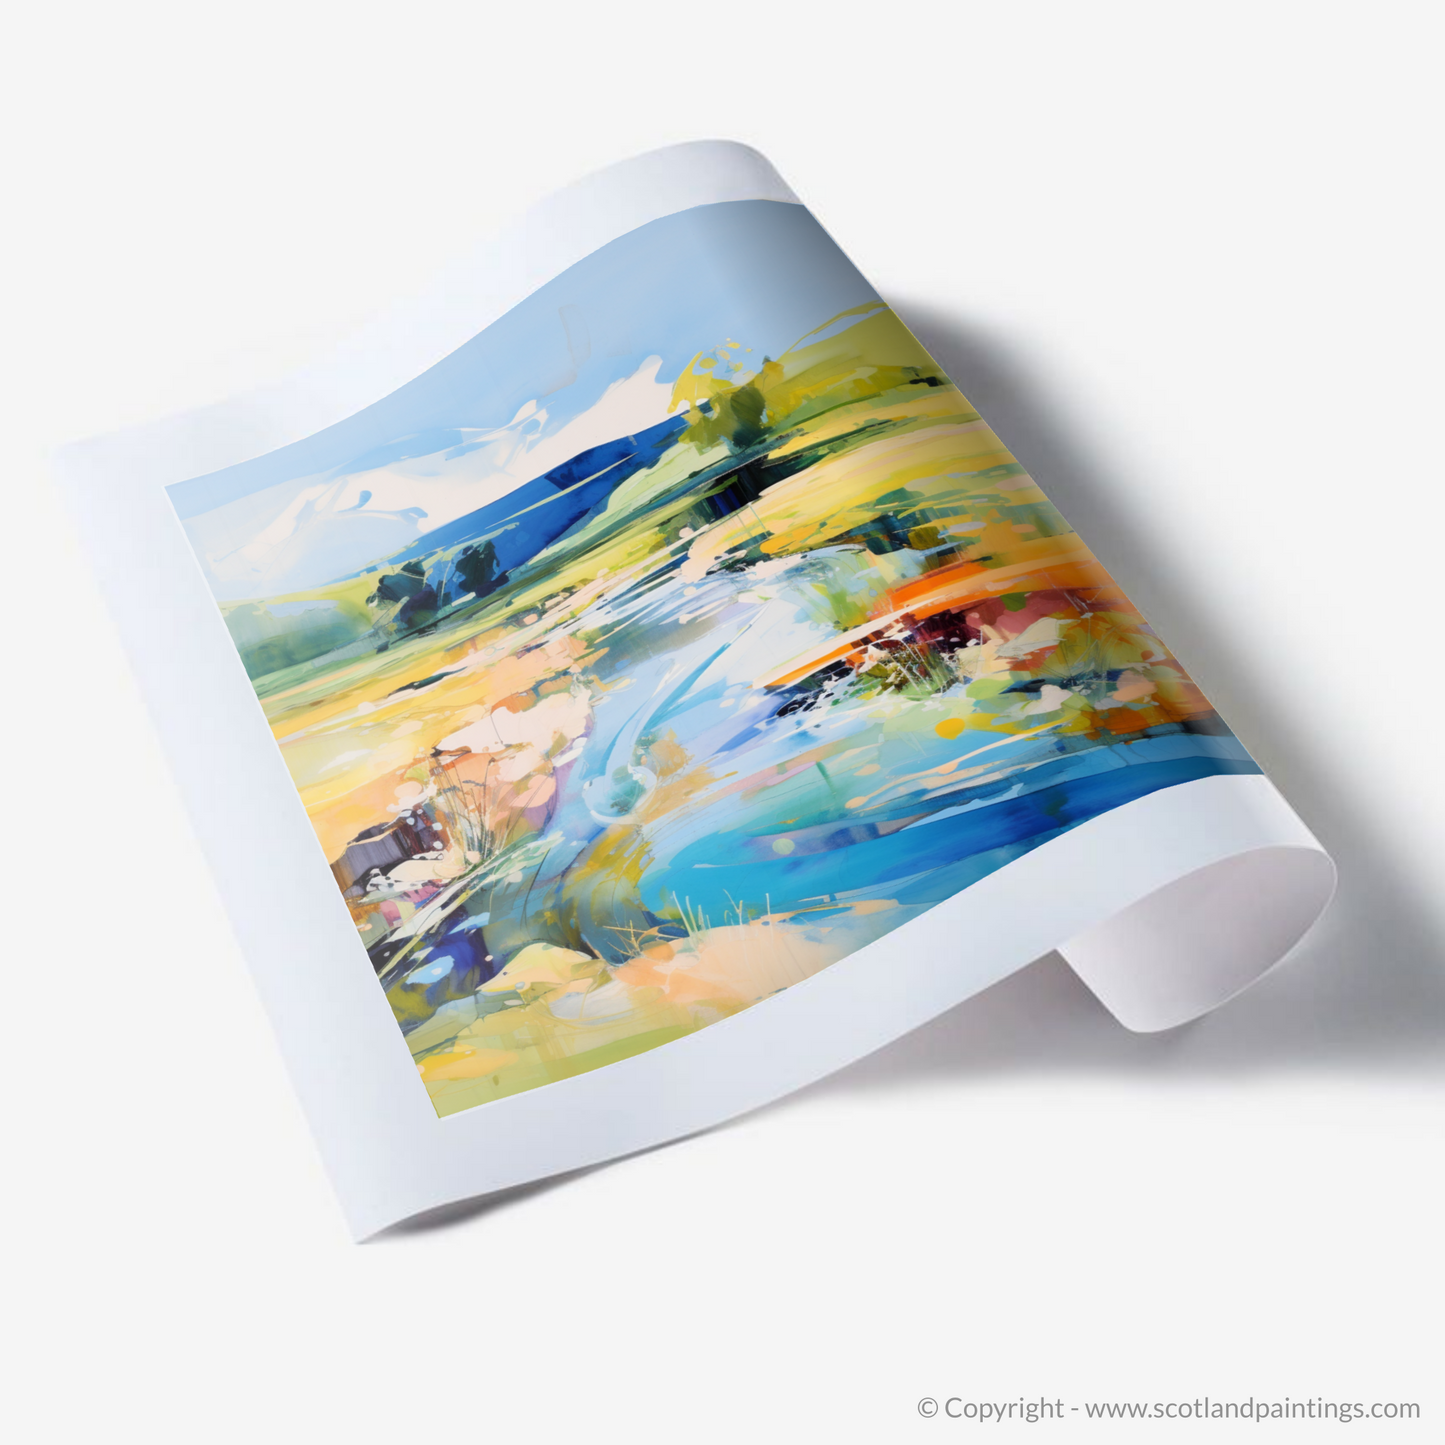 Painting and Art Print of River Lossie, Moray in summer. Summer Hues of River Lossie.